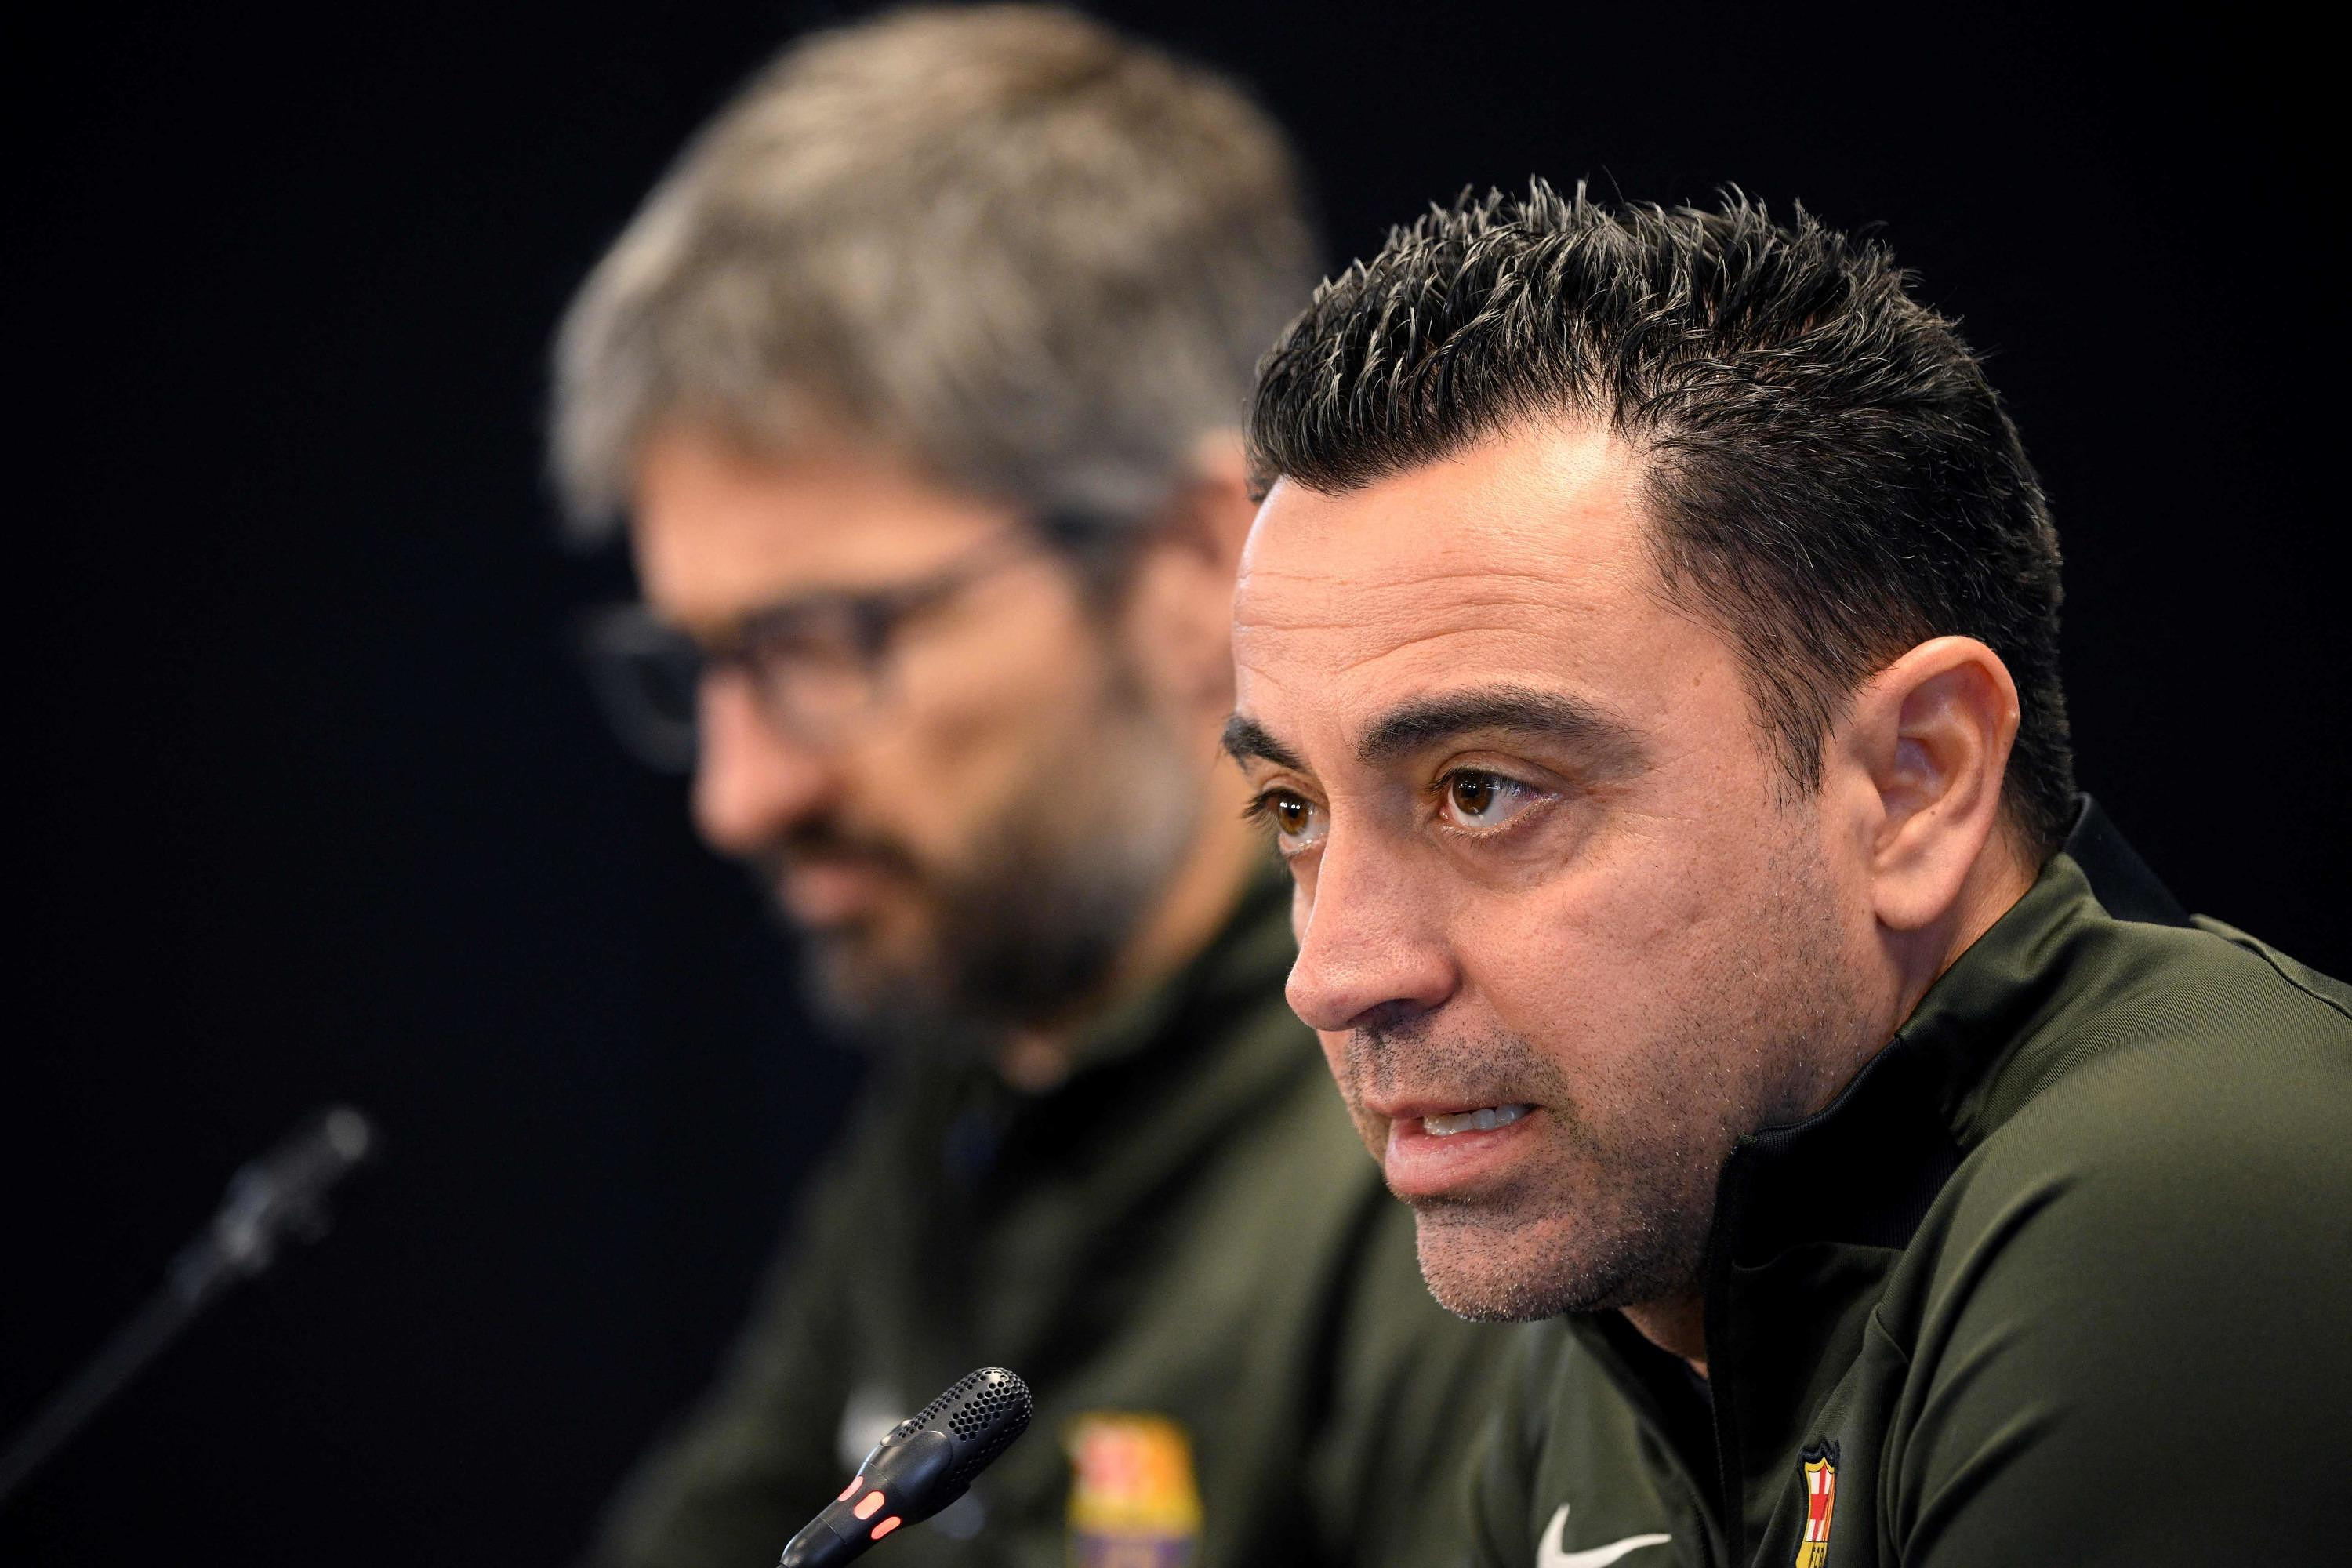 Champions League: Naples is “the most important match of the season” for Barca says Xavi